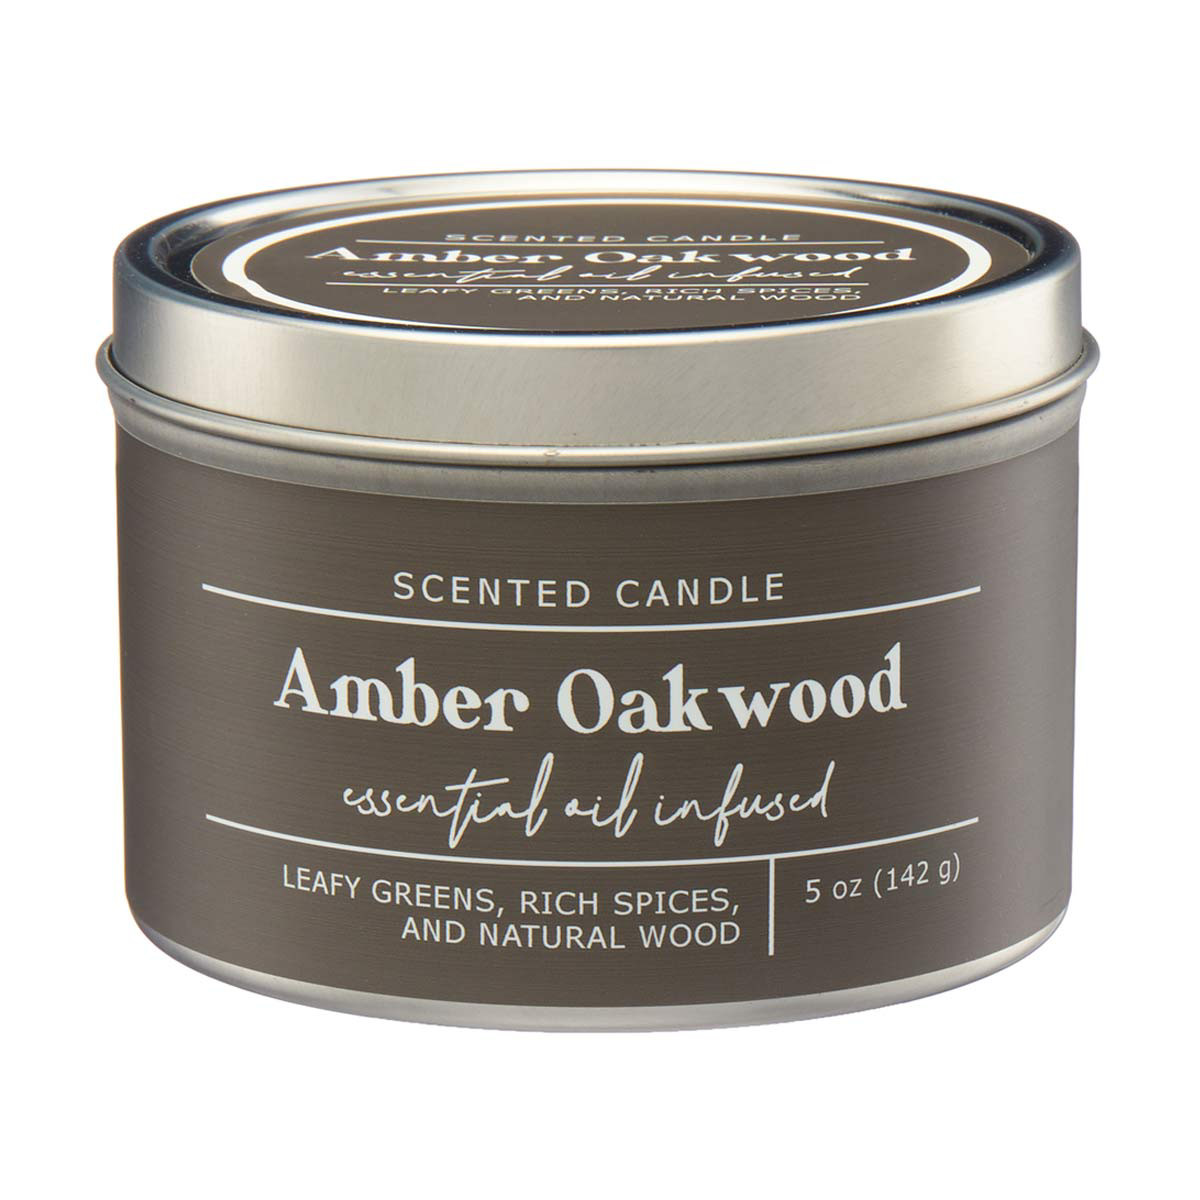 Amber Oakwood Essential Oil Infused Scented Candle